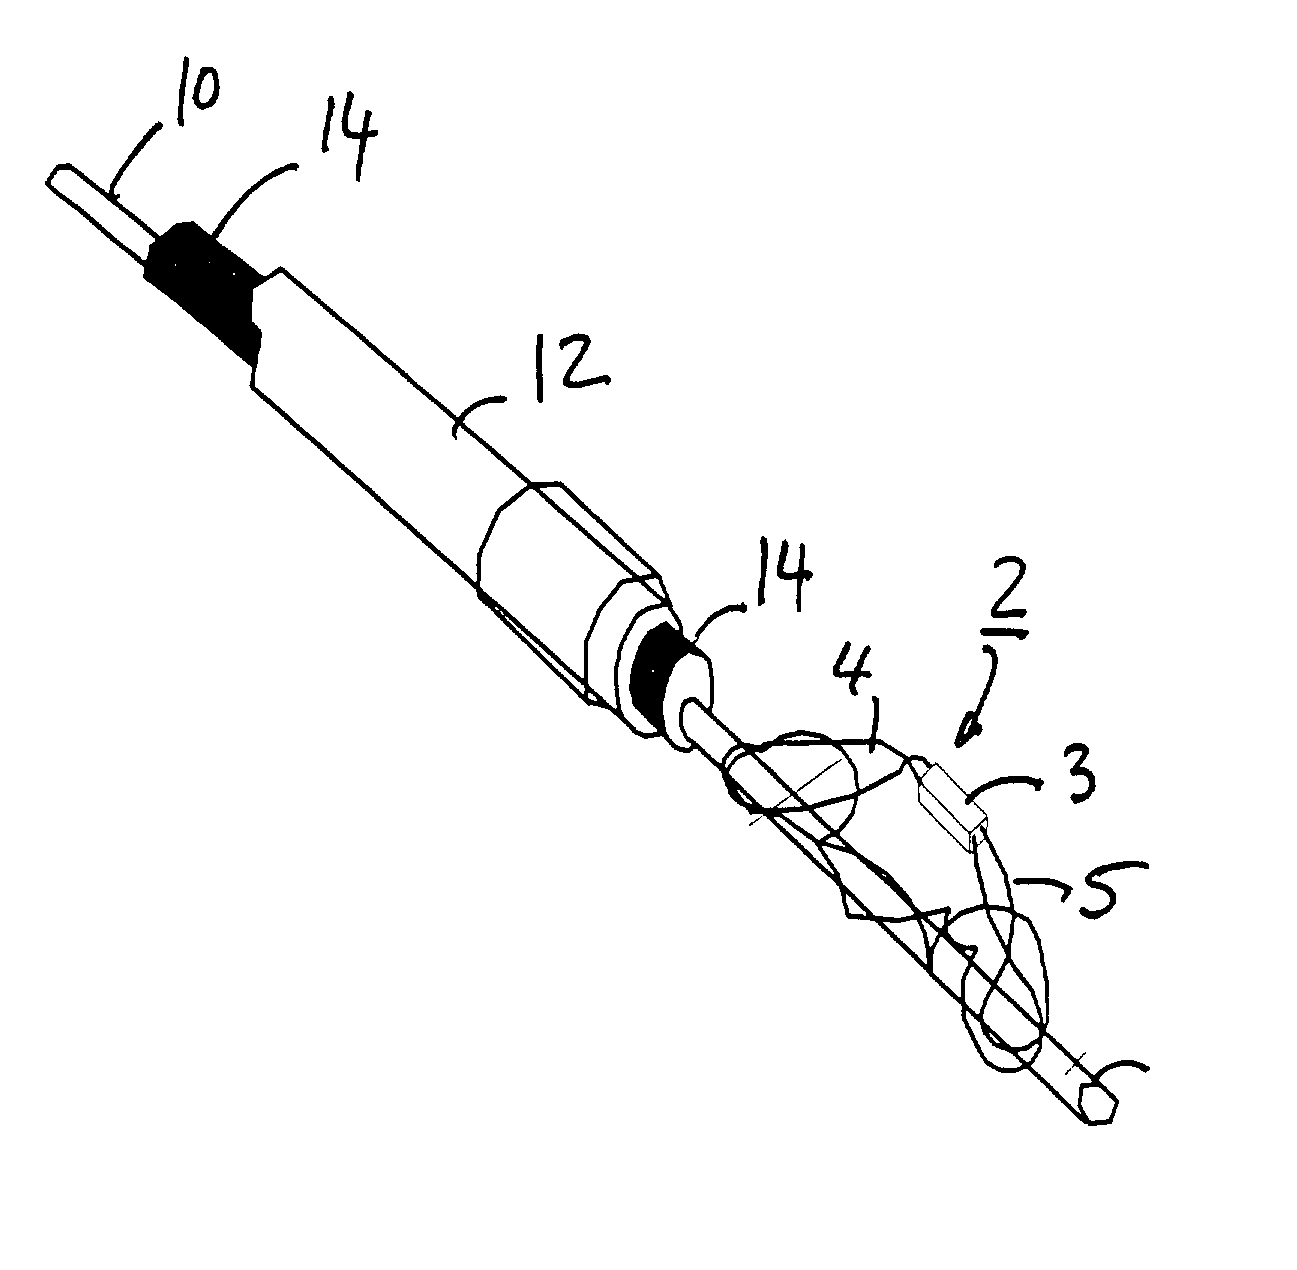 Deployment device, system and method for medical implantation